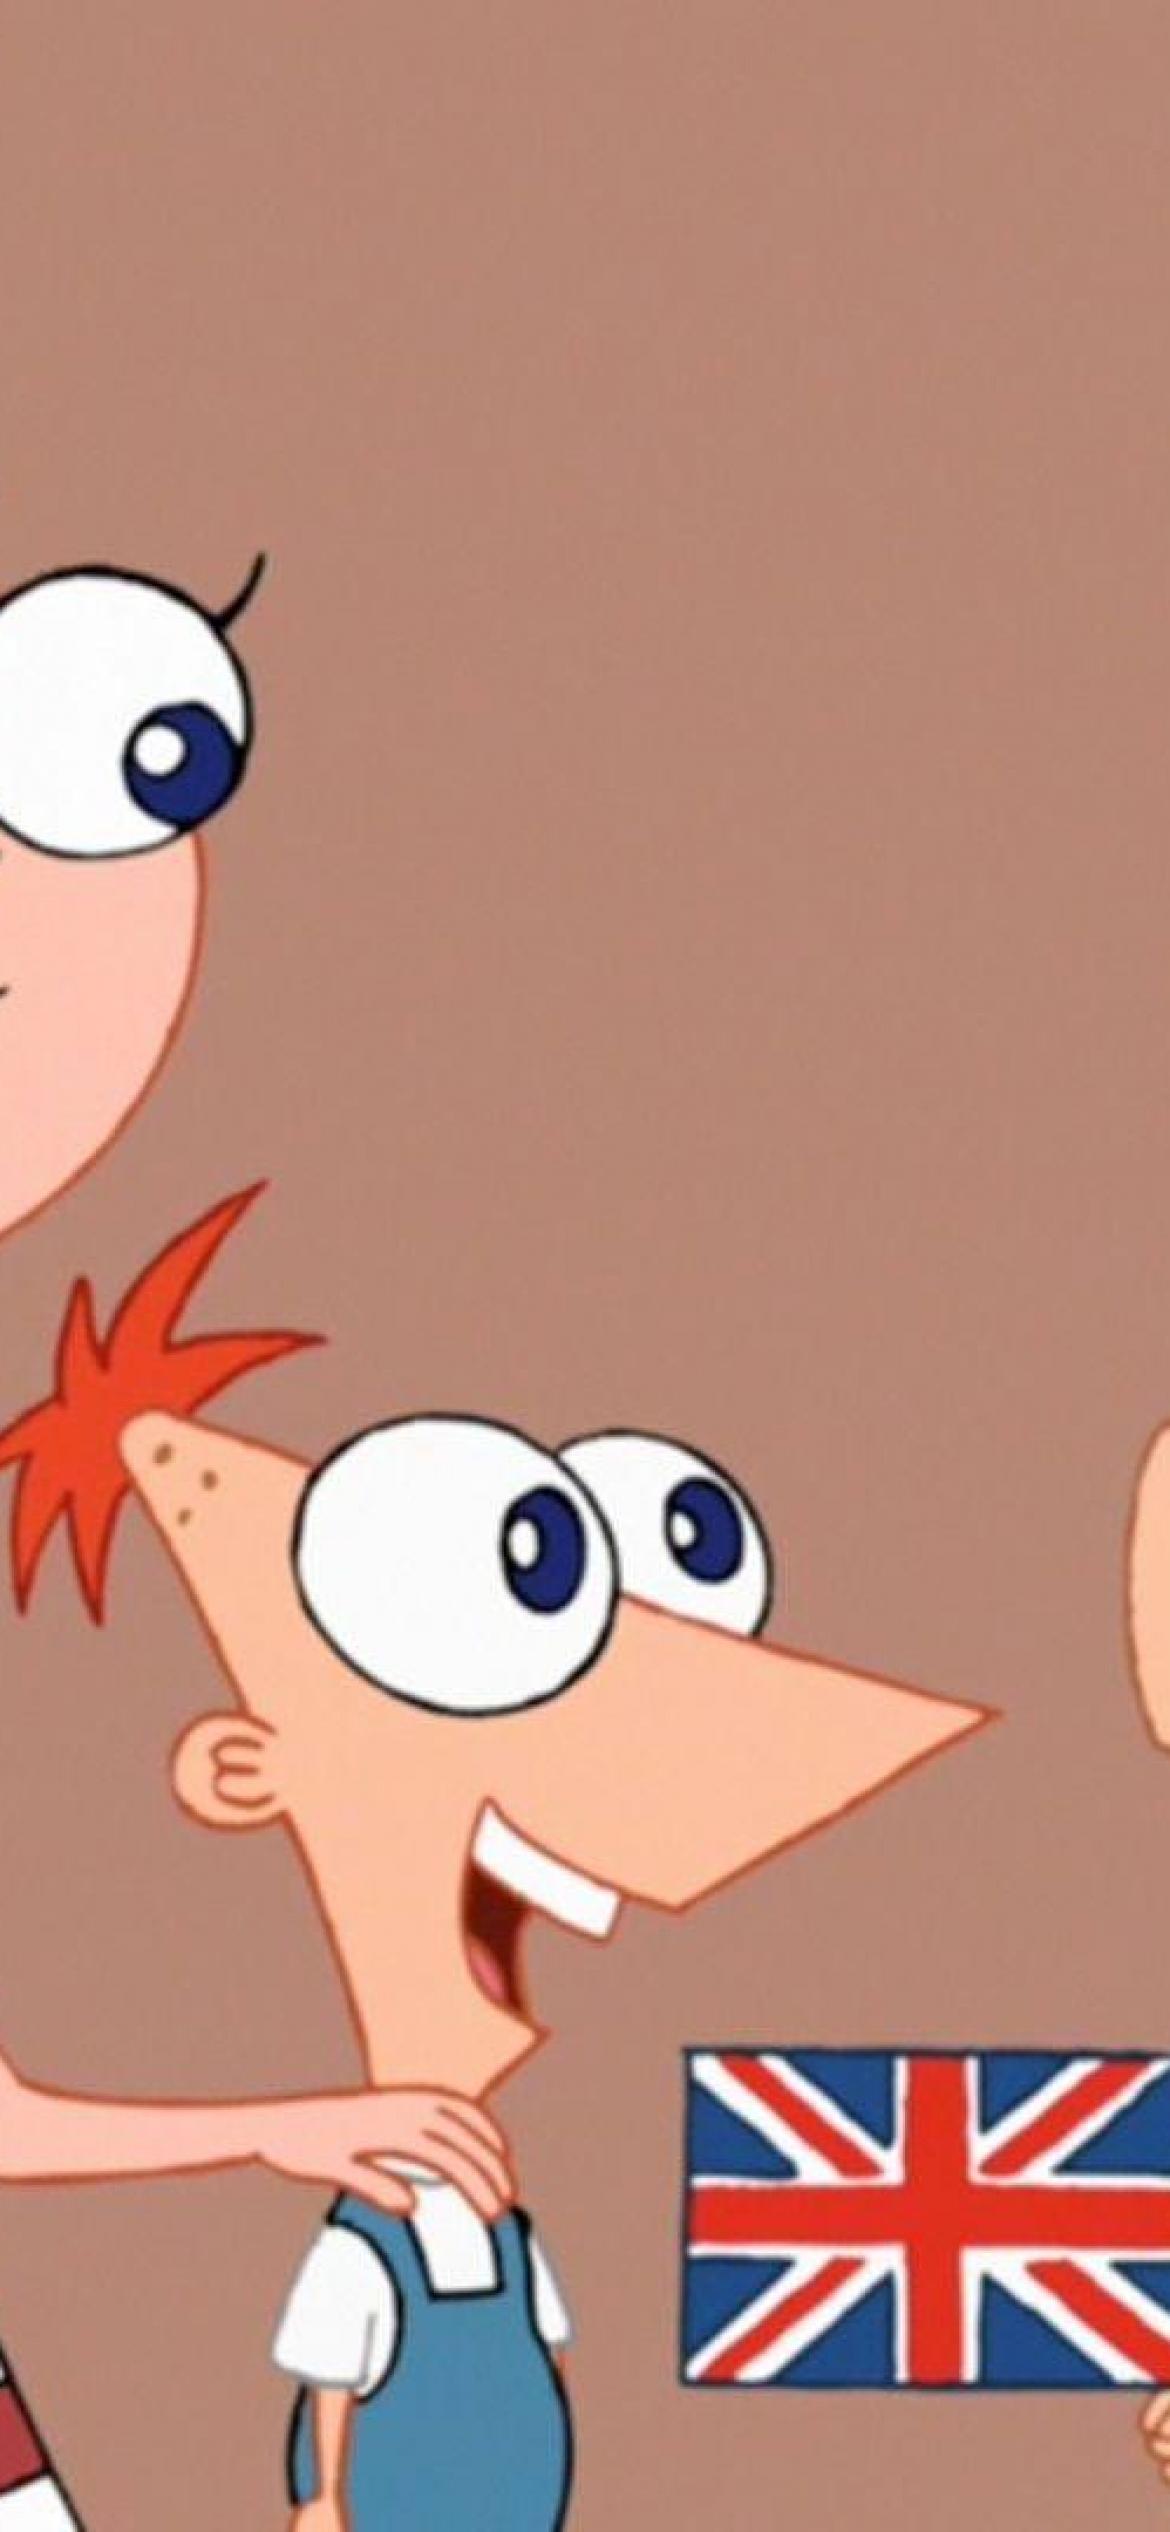 Phineas And Ferb Wallpaper Iphone  Wallpaperforu